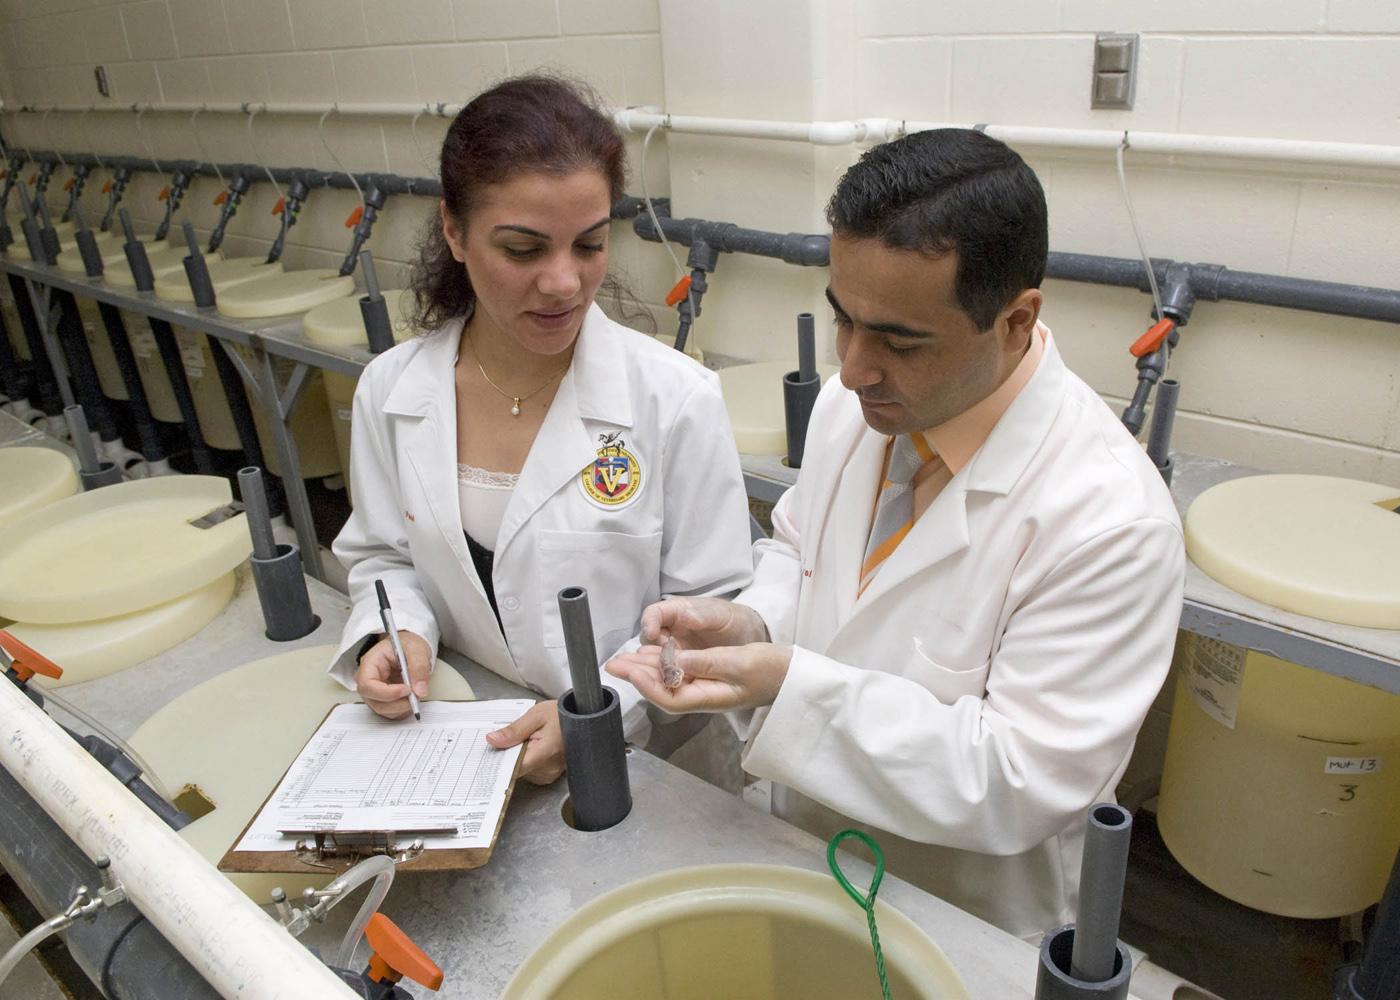 Attila Karsi, research assistant professor at Mississippi State University's College of Veterinary Medicine, and Nagihan Gulsoy, a visiting professor, examine a catfish fingerling with the disease enteric septicemia, a bacterial disease that costs the catfish industry millions of dollars each year. (Photo by Tom Thompson)